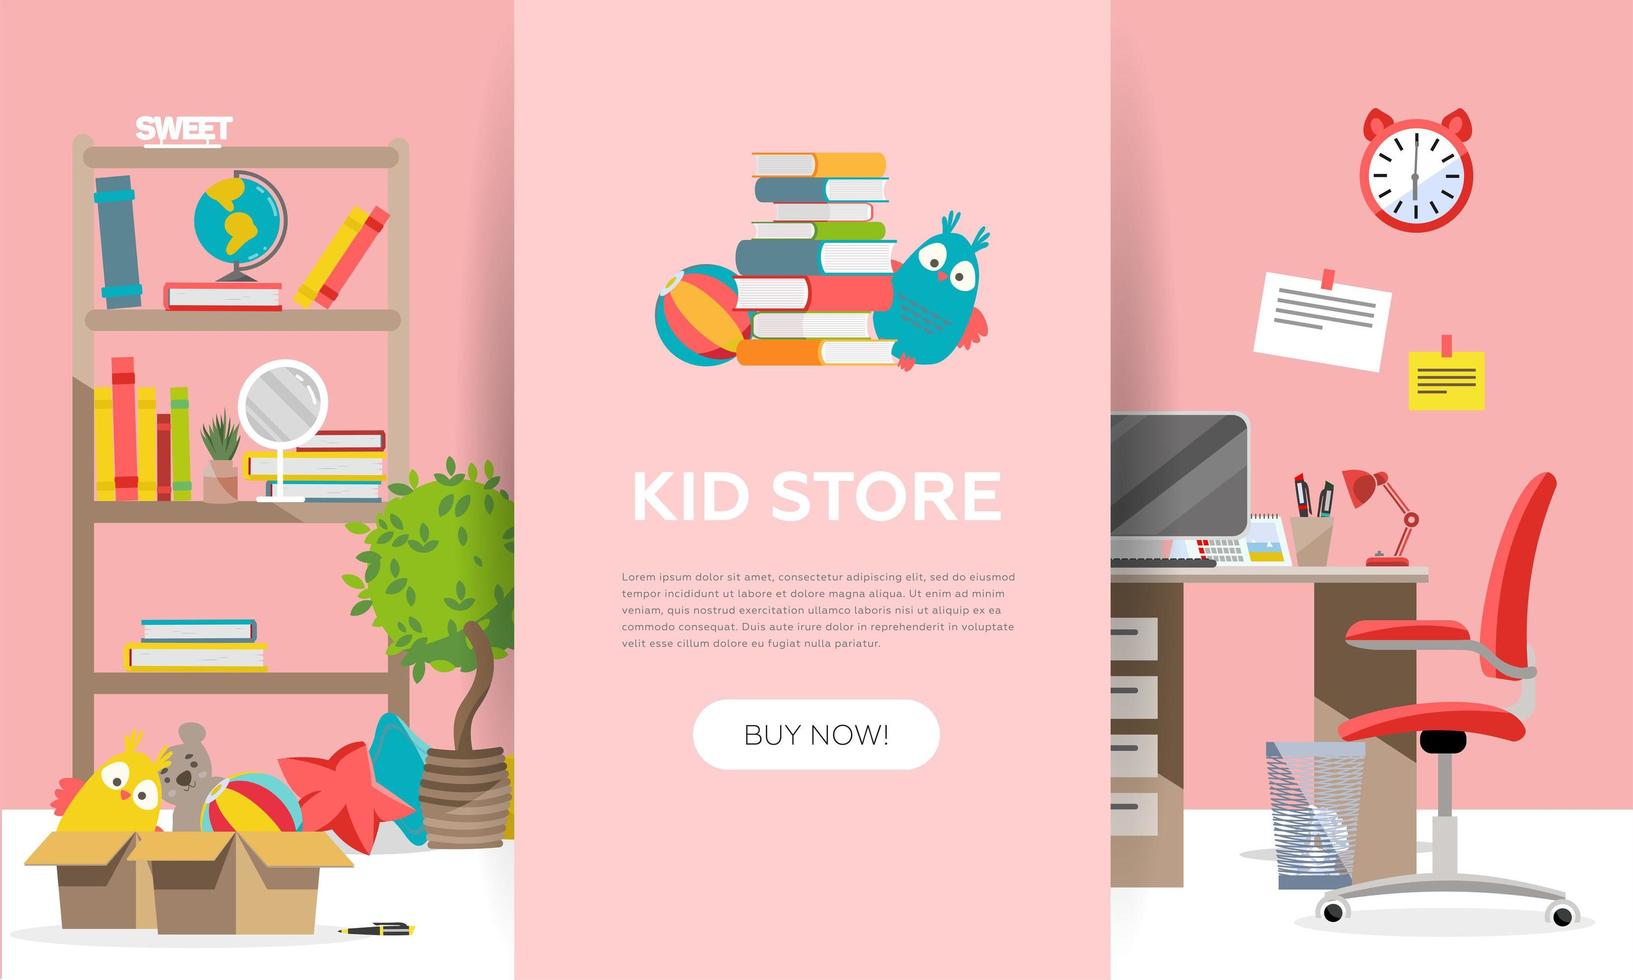 Childen's goods shop landing page in flat cartoon style. Kids game teddy bear,interior items and school supplies. Children fun activity play colorful girl room interior background vector illustration